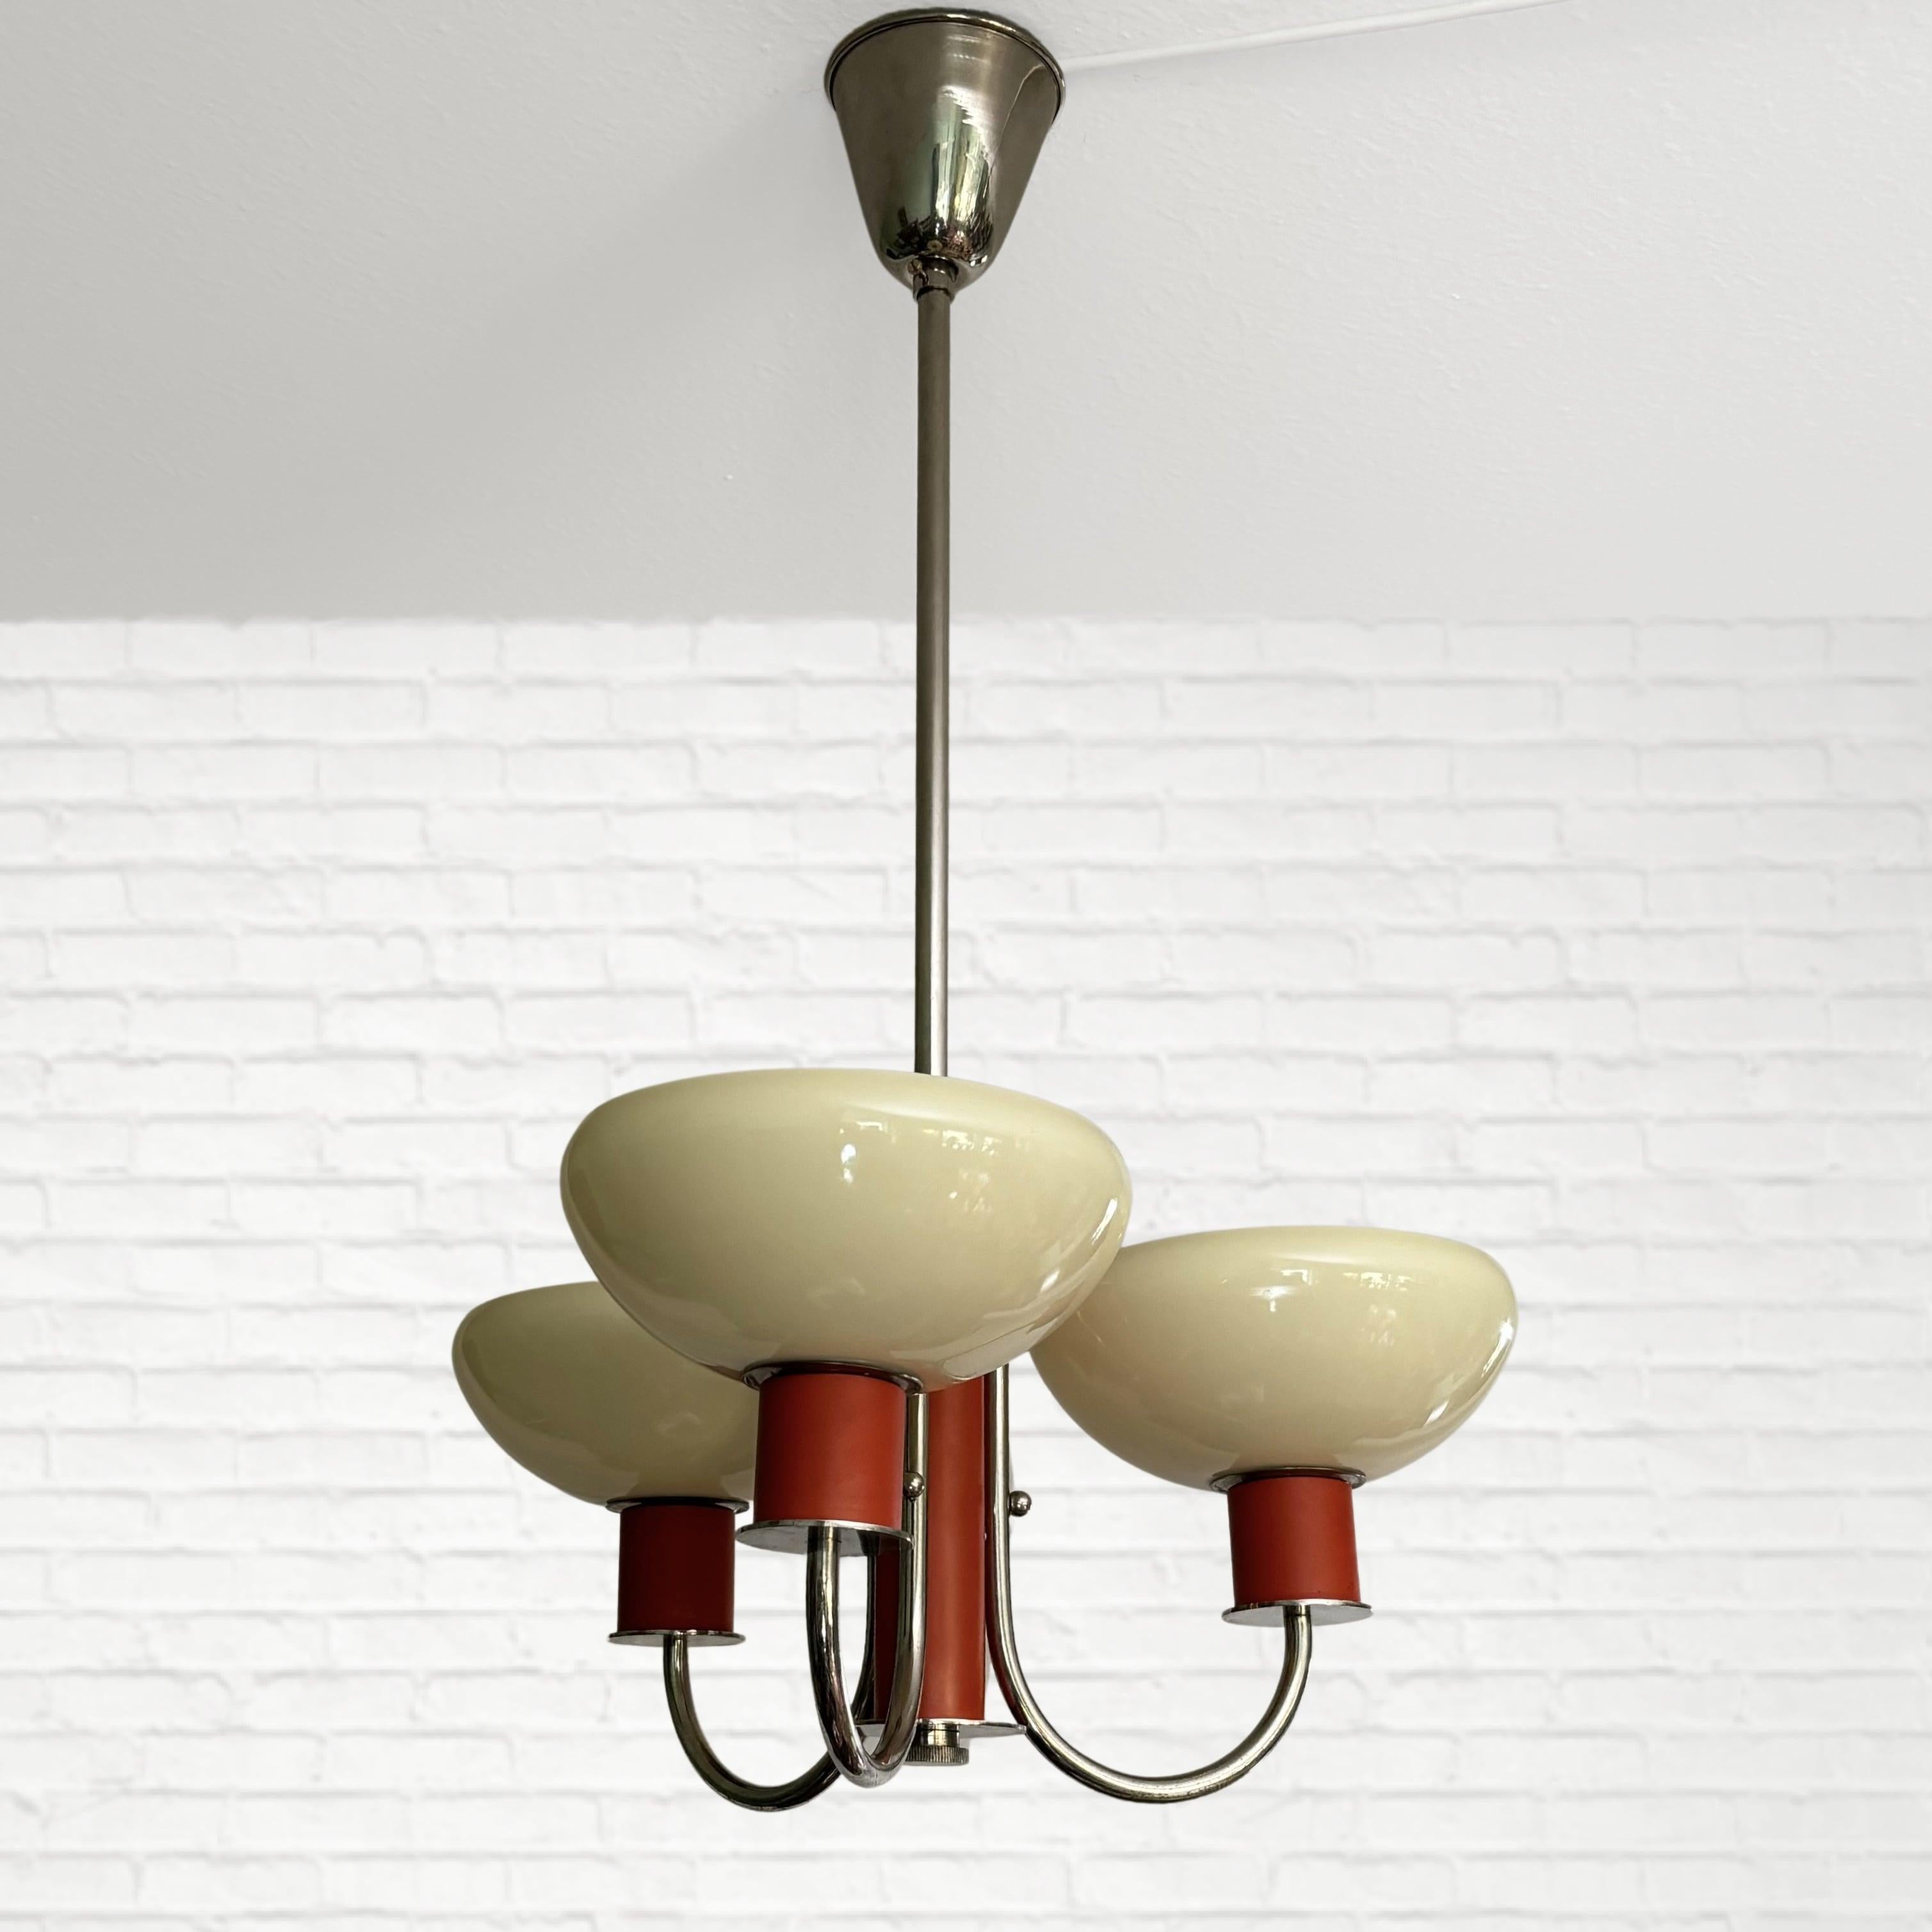 A beautiful Swedish modernist chandelier attributed to Erik Tidstrand for the renowned Swedish department store Nordiska Kompaniet. Produced in the 1930s, during a time when functionalism had its breakthrough in Scandinavia. Crafted from steel and